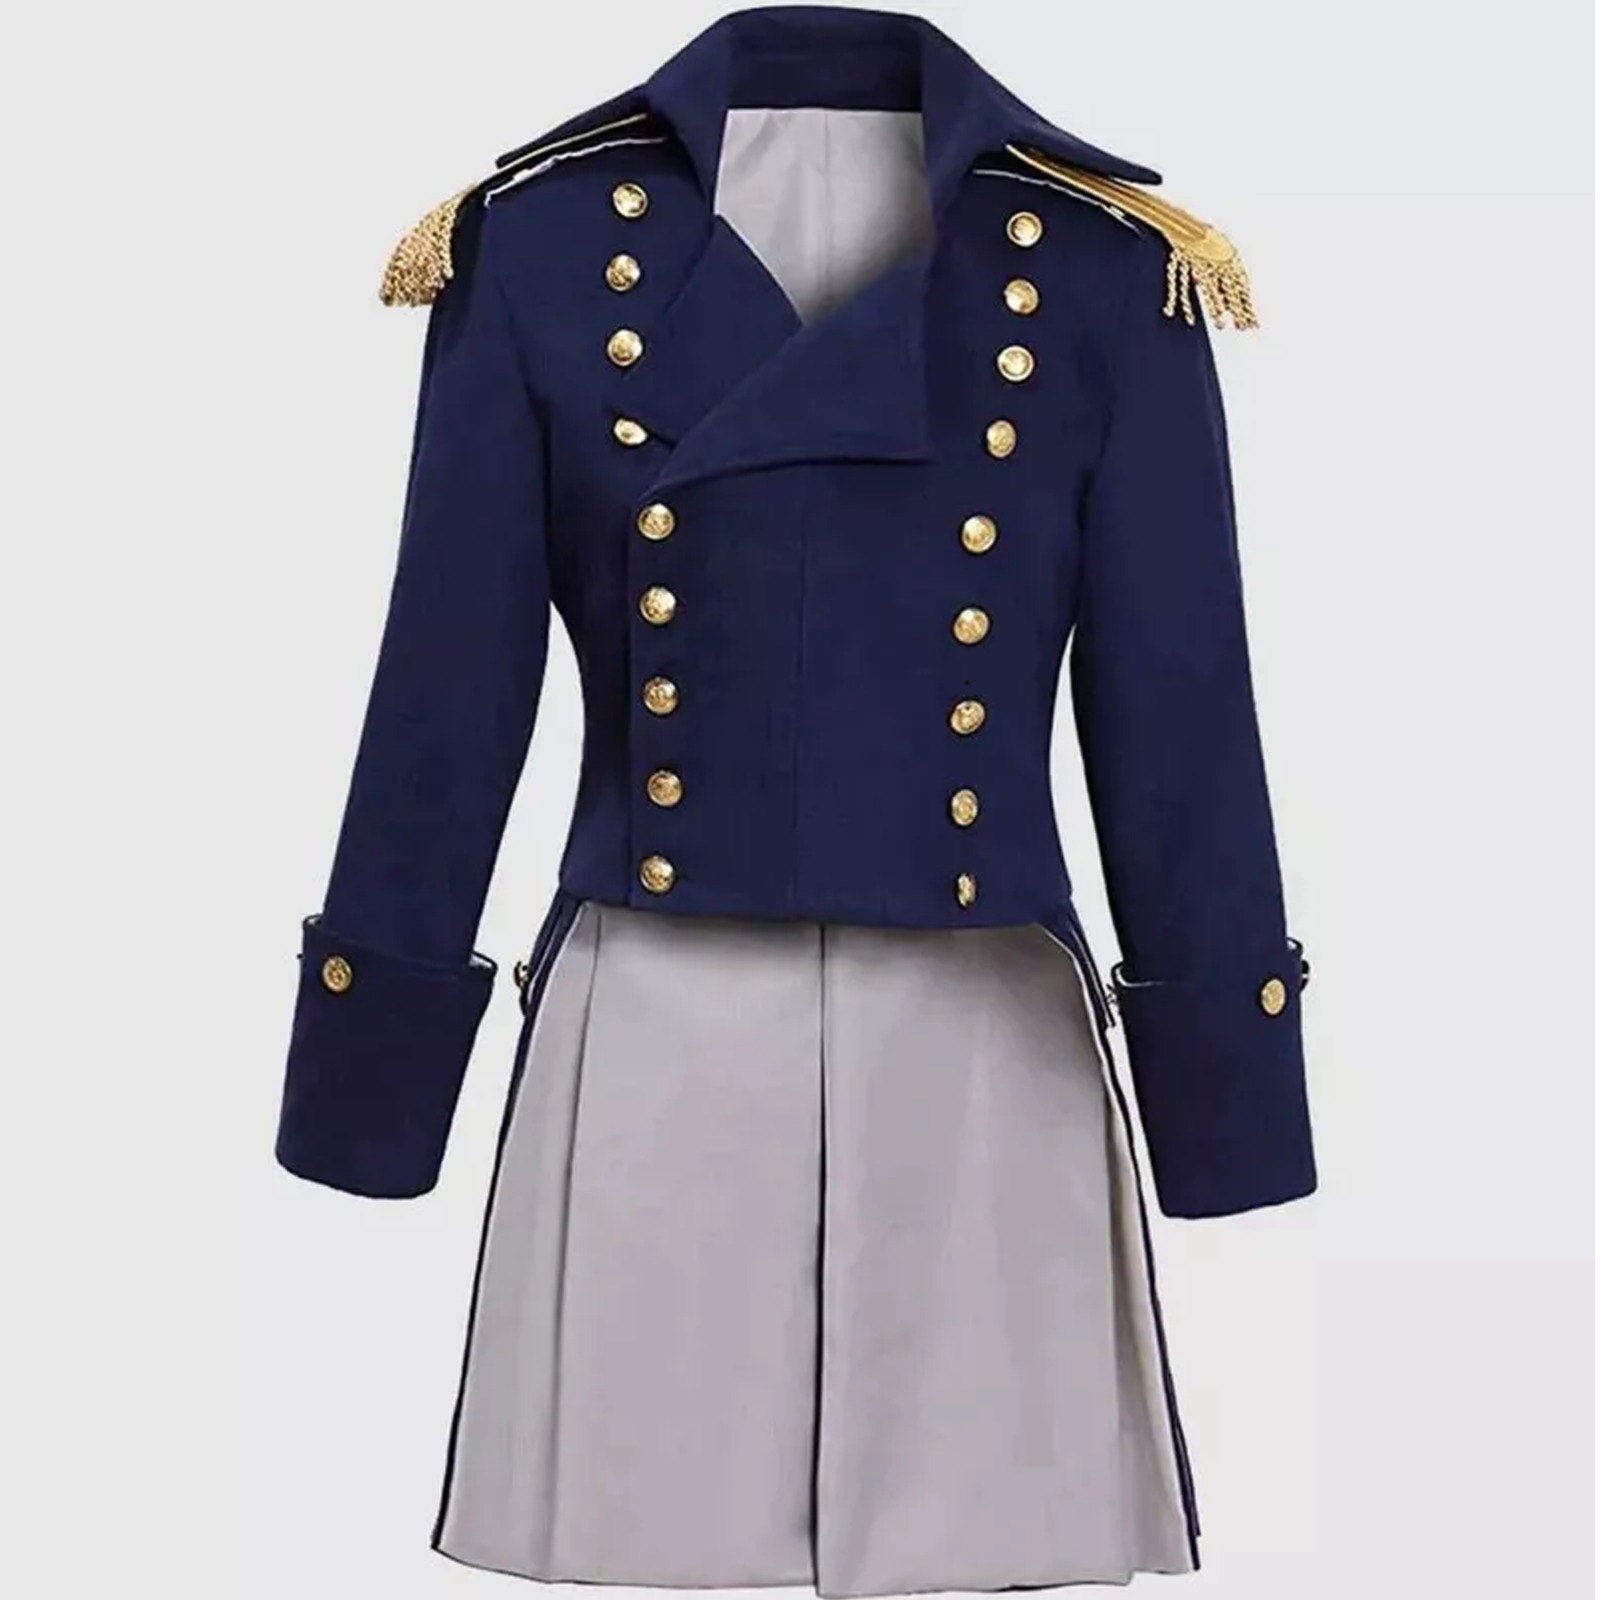 Navy Blue Colonial Military Uniform Jacket Men\'s Hussar Jacket Quick Shipping